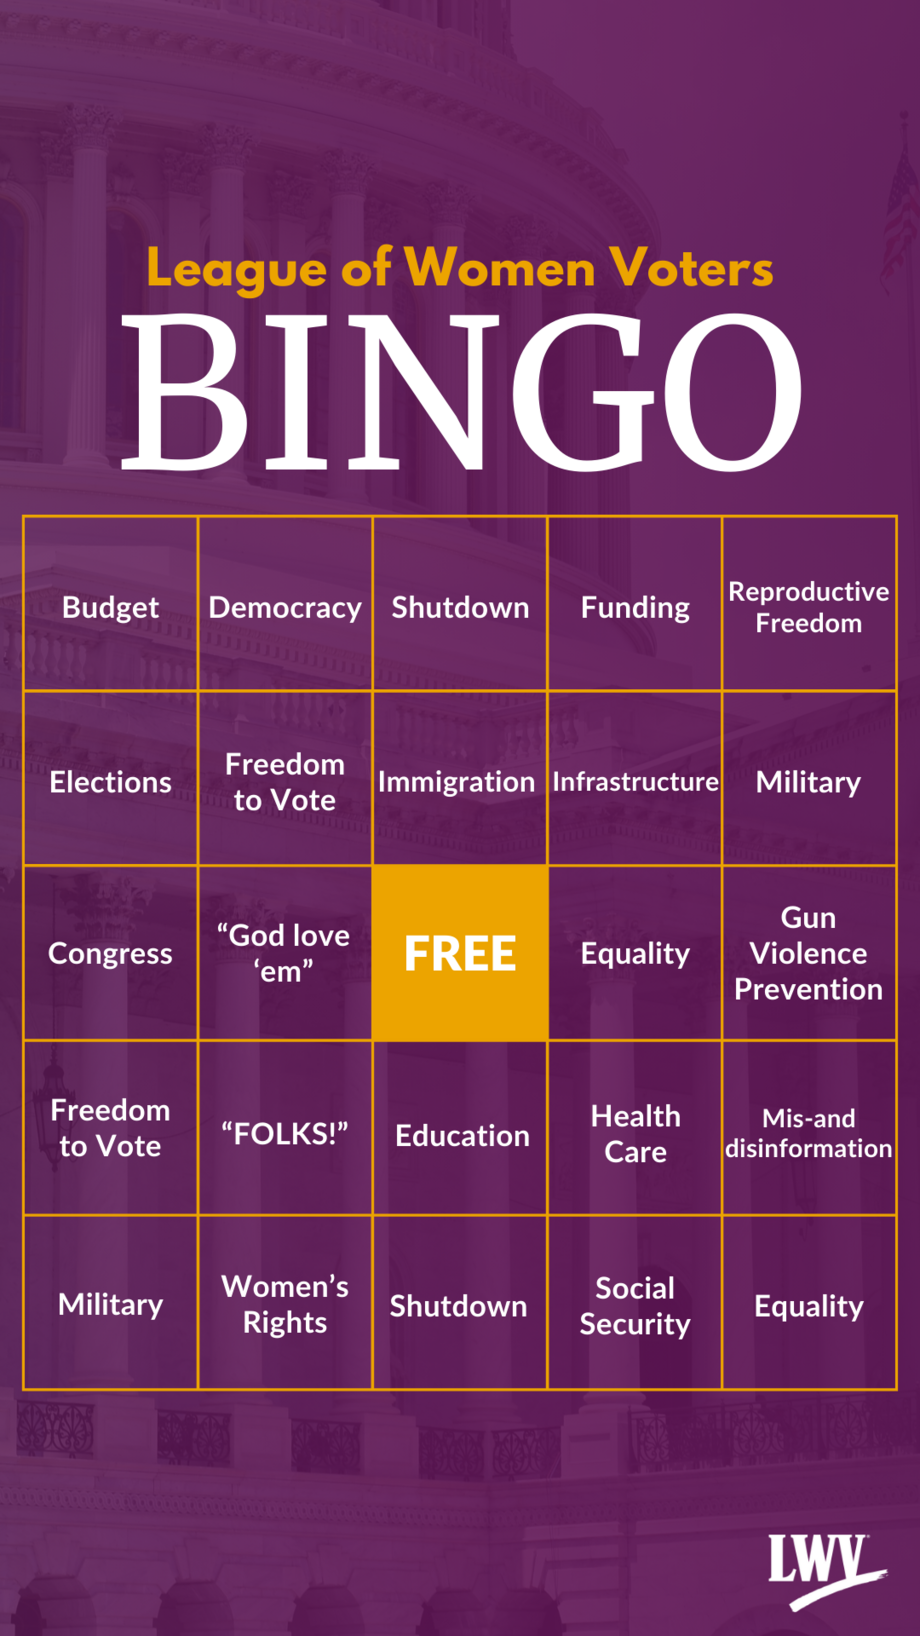 A 5x5 bingo card with various political catchphrases